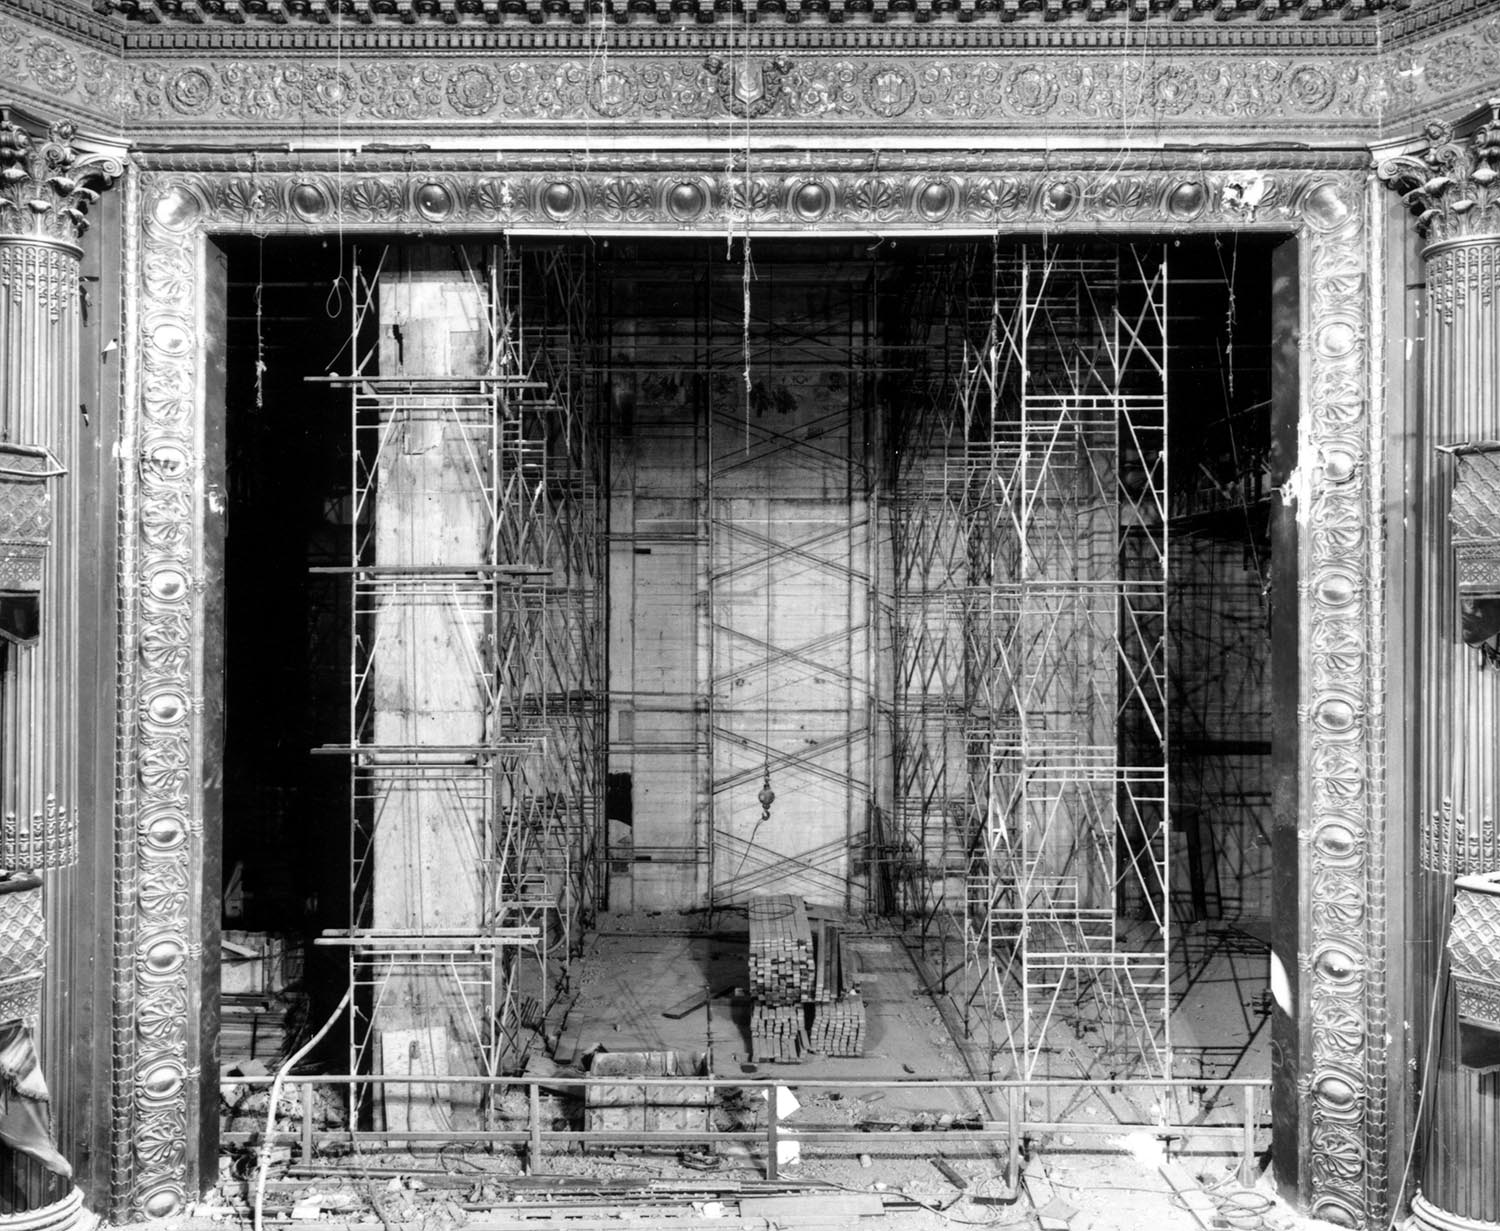 Interior view of lavish Geary Theater in San Francisco, CA with scaffolding and construction materials during renovation